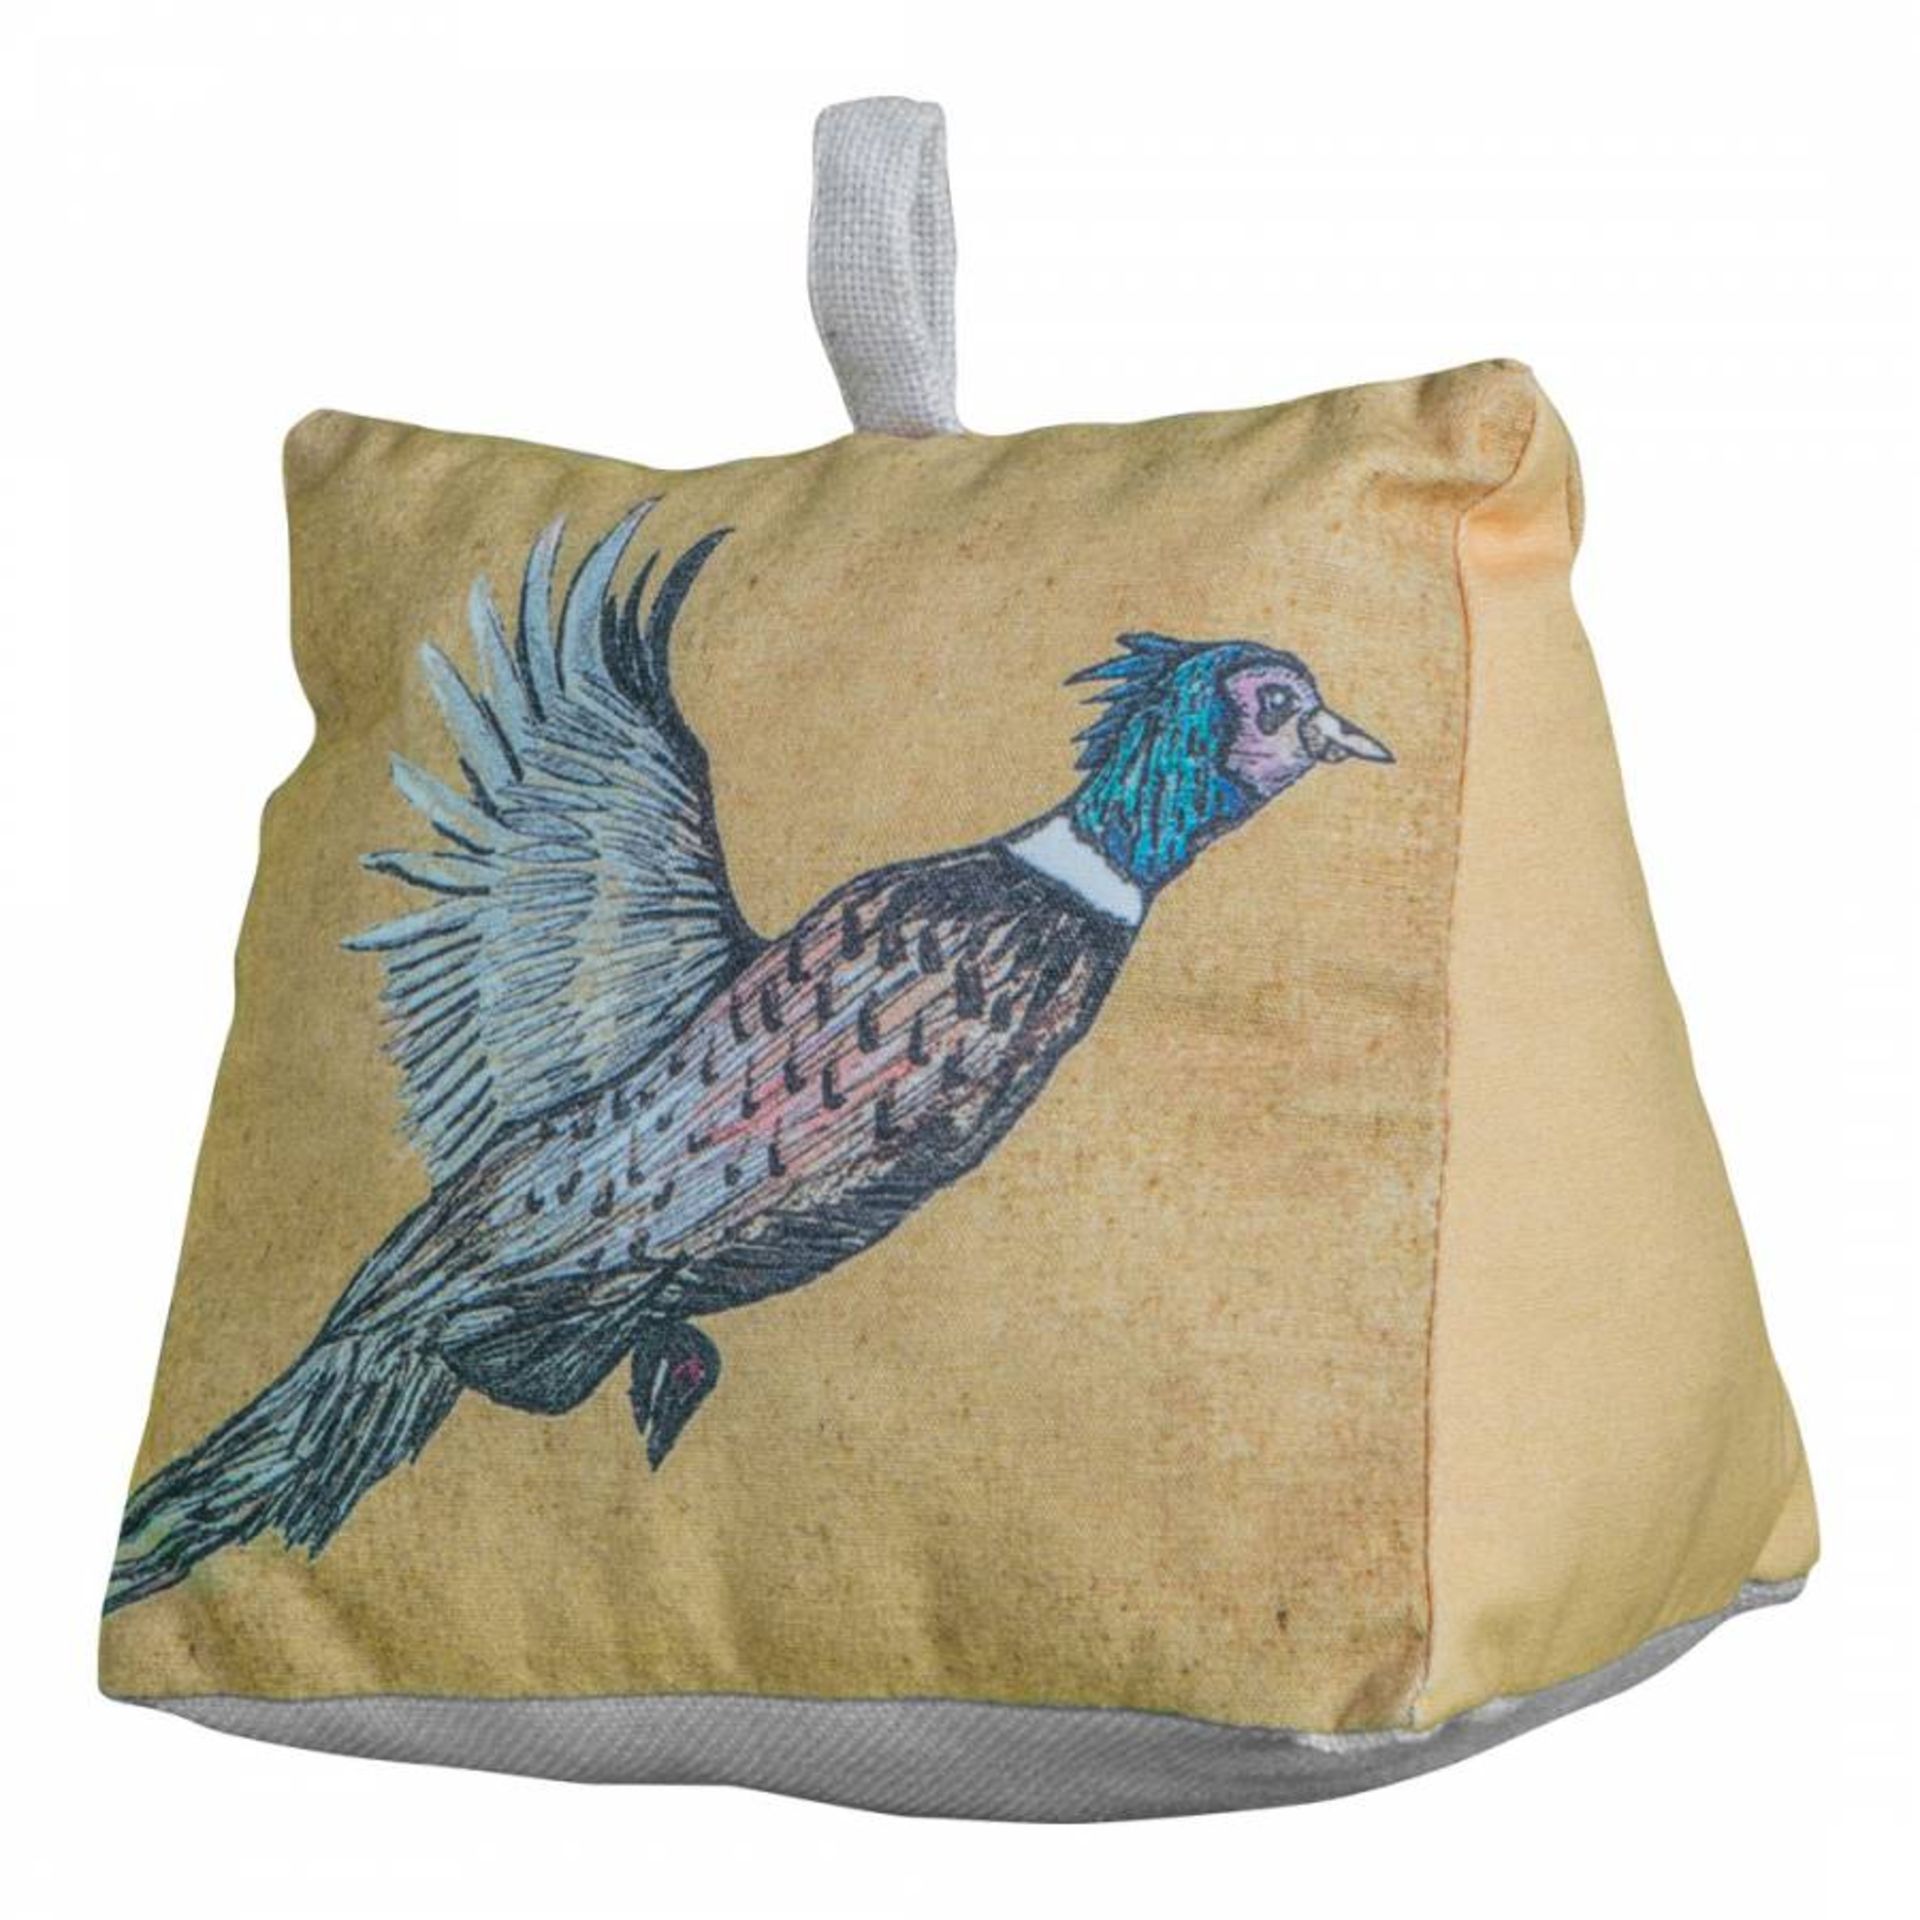 Pheasant Doorstop Ochre Fun triangle doorstop with an ochre pheasant motif. Perfect for propping